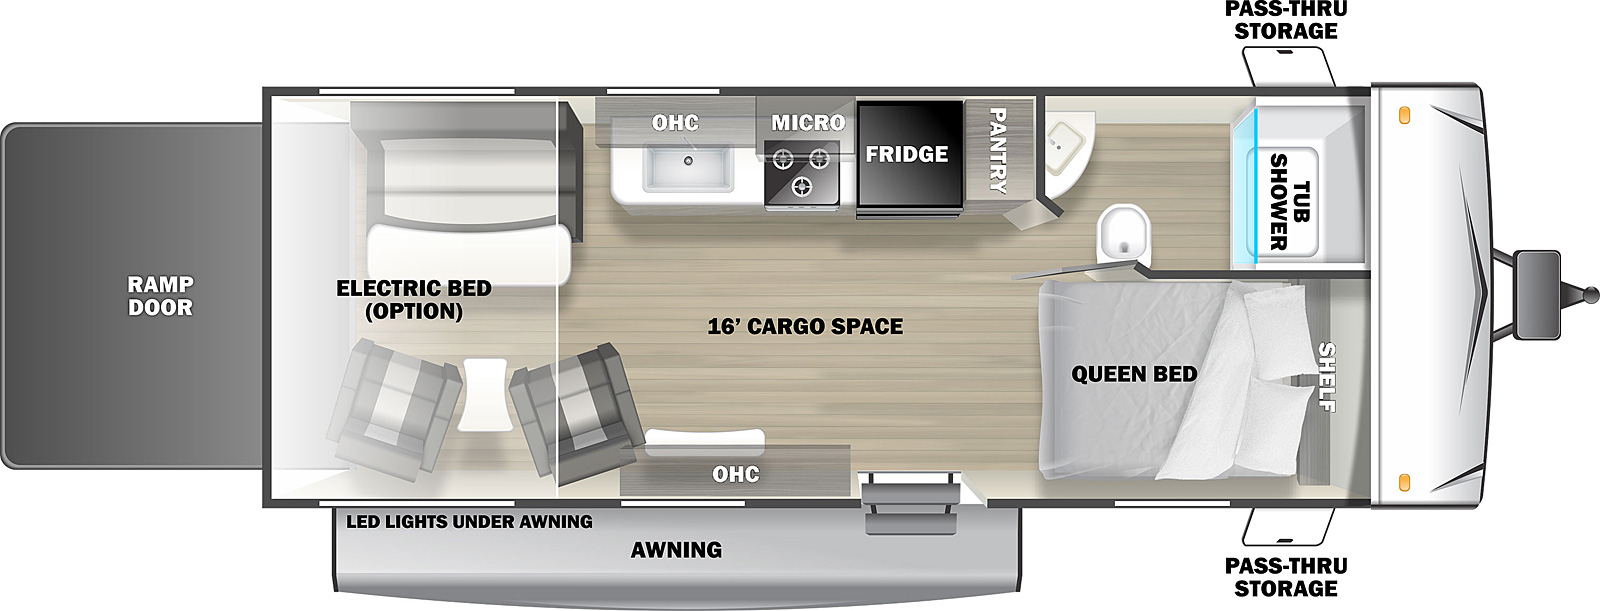 The Sandstorm 186 Toy Hauler has one entry door, one rear ramp door and an electric power awning. It has sixteen feet of cargo space. Pass through storage is toward the front of the RV. The entry door opens into the living area. Directly to the left of the entry door are overhead storage compartments. To the left of the overhead storage compartments are two chairs with a table in the middle. A ramp door forms the rear wall of the RV. On the off door side, opposite the two chairs, is a flip sofa with a table. A kitchen area is in the front off door corner of the living area. The kitchen has a countertop with a sink and a stove. Overhead storage is above the sink and a microwave is above the stove. A refrigerator is to the right of the countertop. A pantry is to the right of the refrigerator. A bathroom is in the front off door corner of the RV. The bathroom has a sink, a toilet, and a tub shower. The front door side corner has a full bed with a shelf above it.